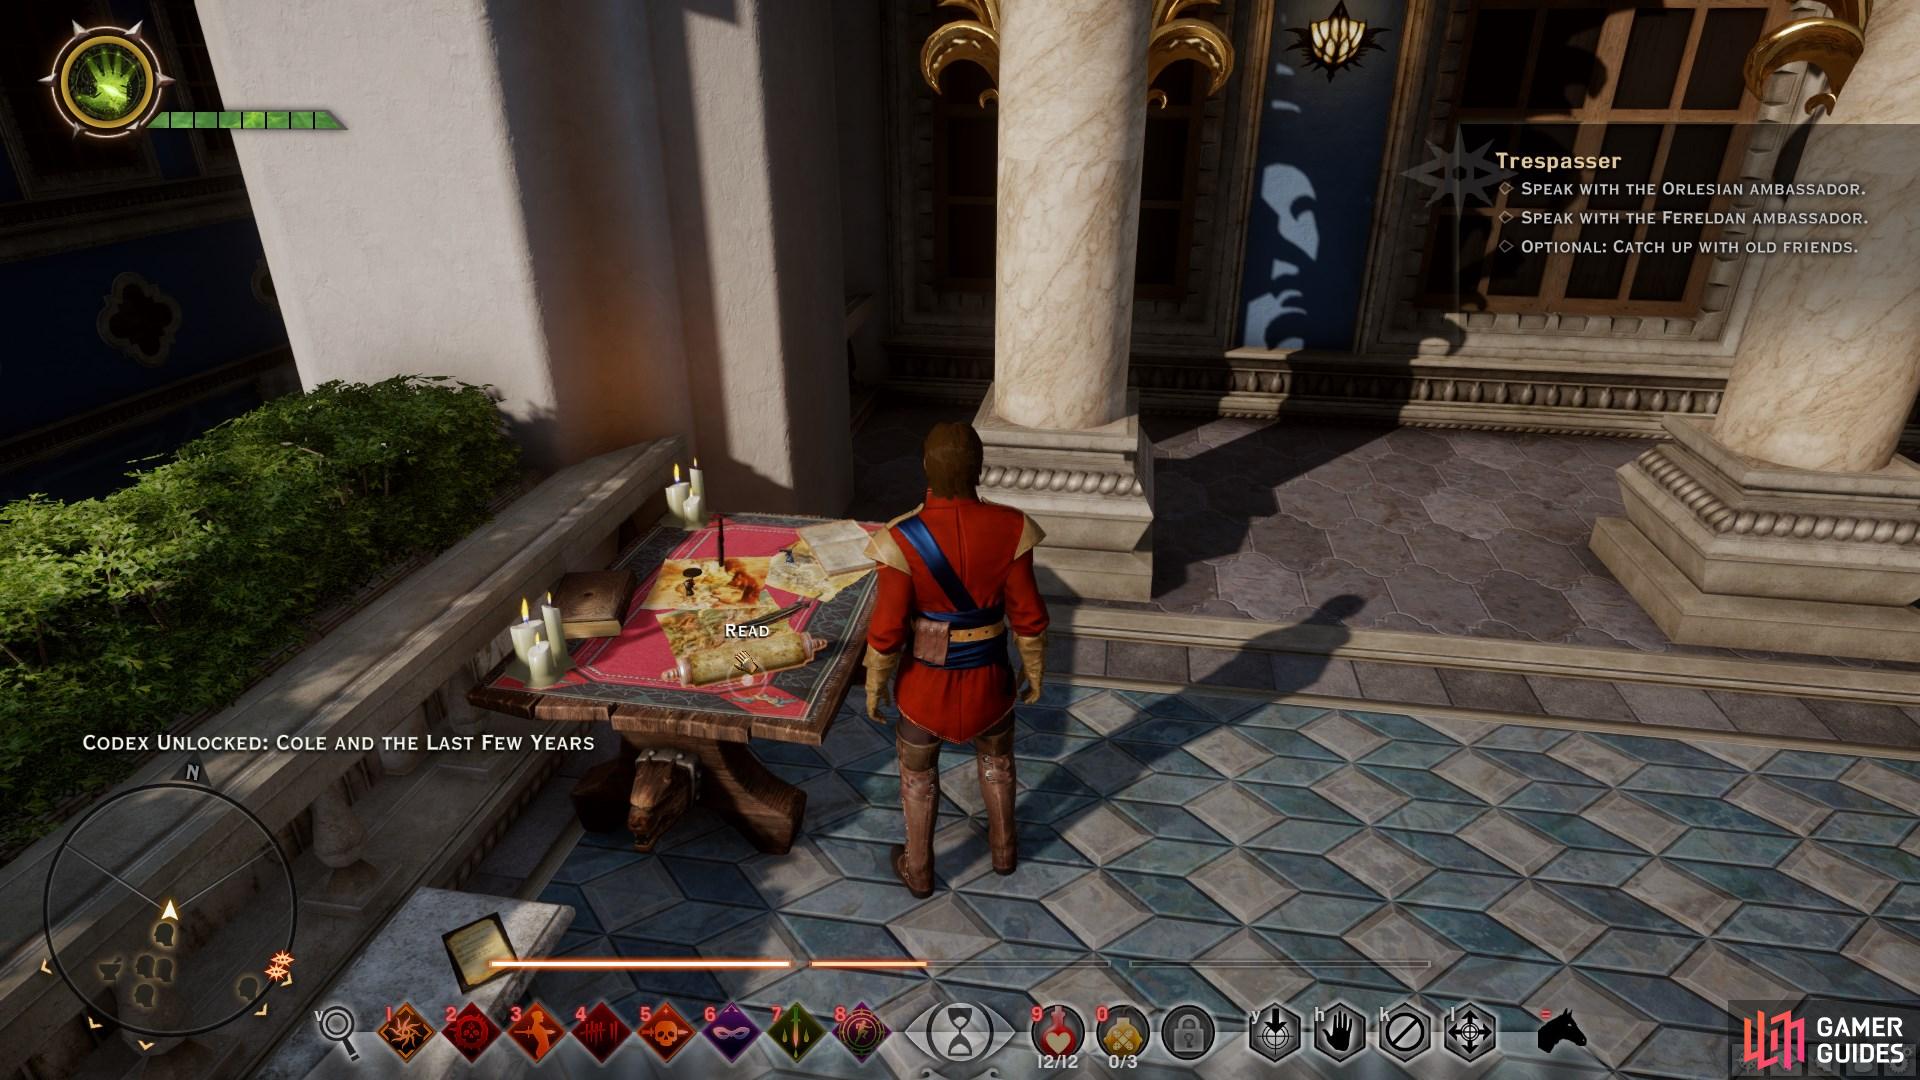 Be sure to thoroughly search the courtyard of The Winter Palace for any notes on companions.